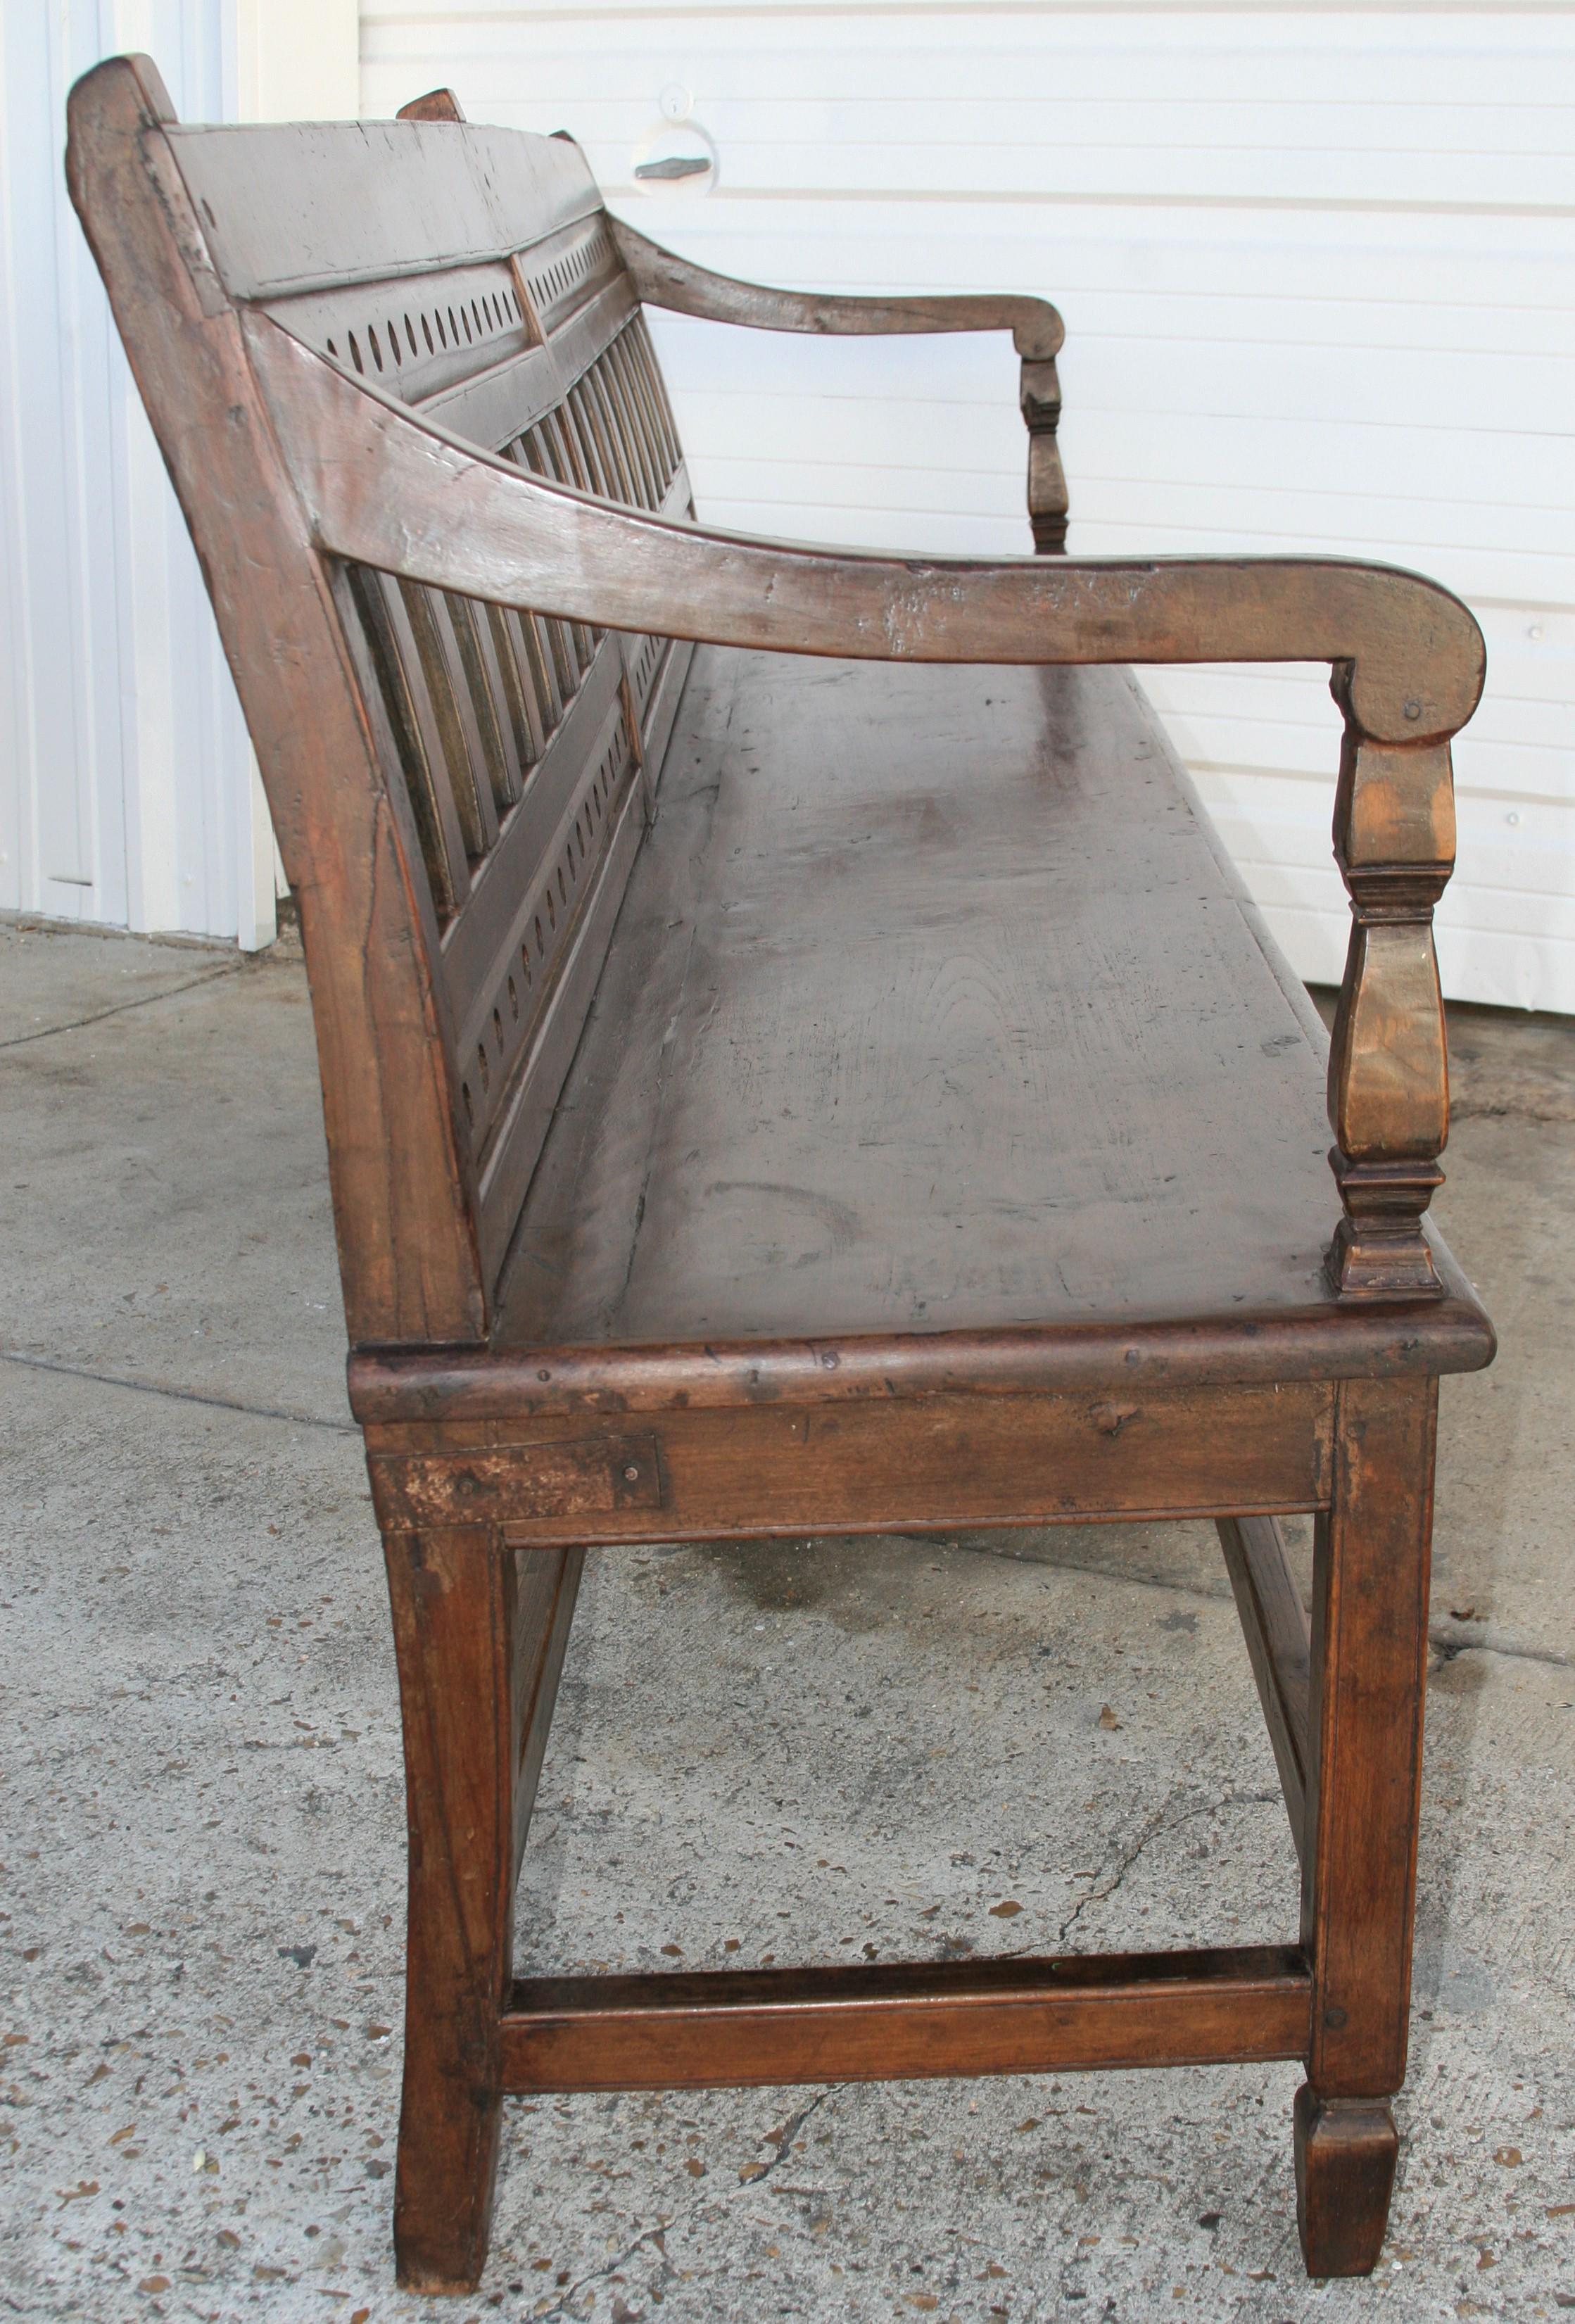 Teak Classic Example of a Colonial Era Bench from the British Empire For Sale